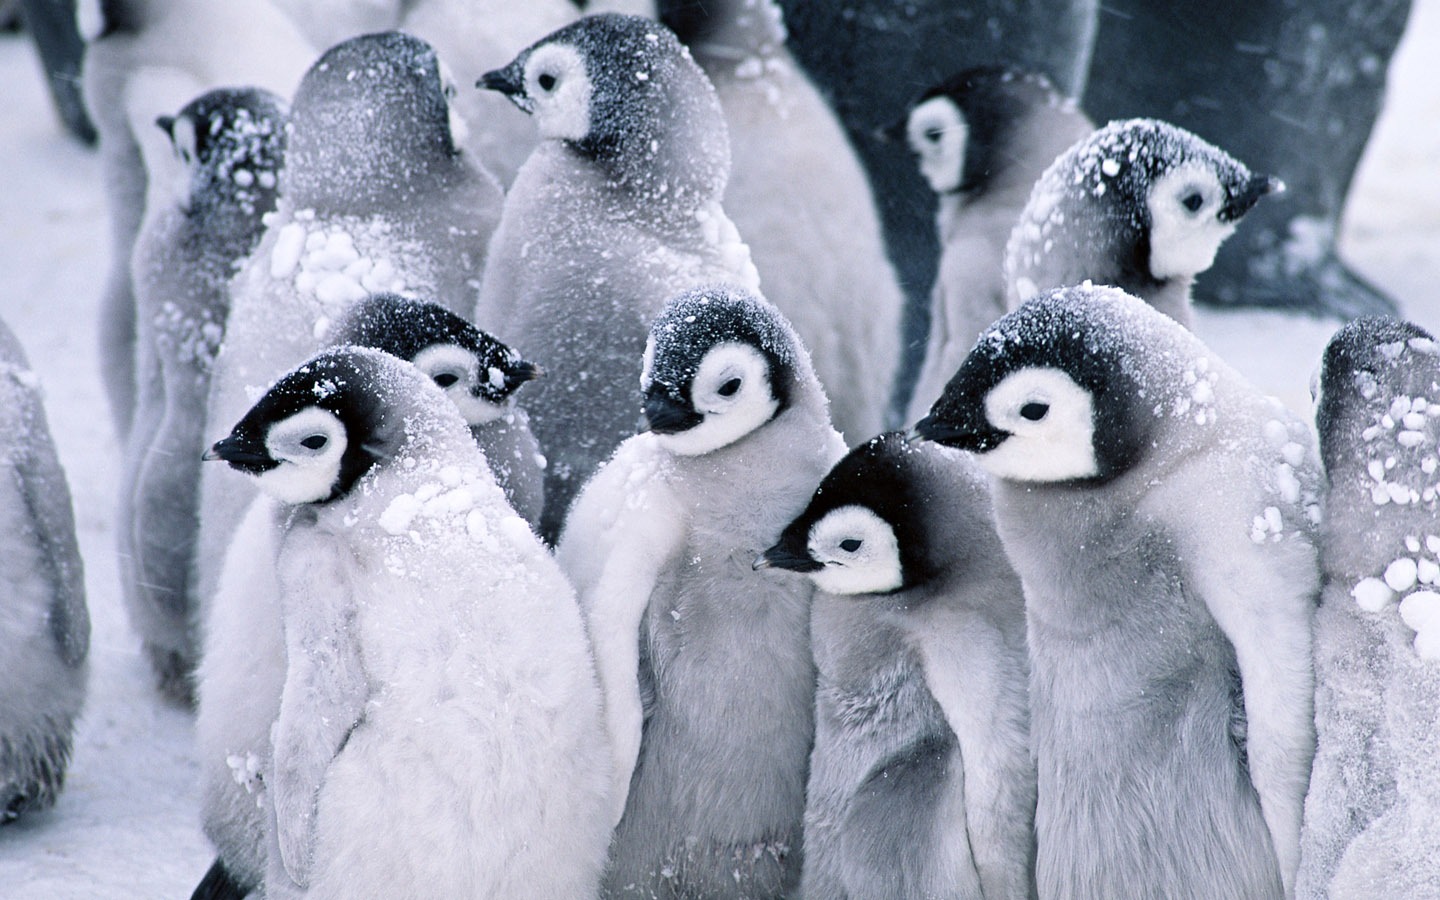 Photo of Penguin Animal Wallpapers #1 - 1440x900